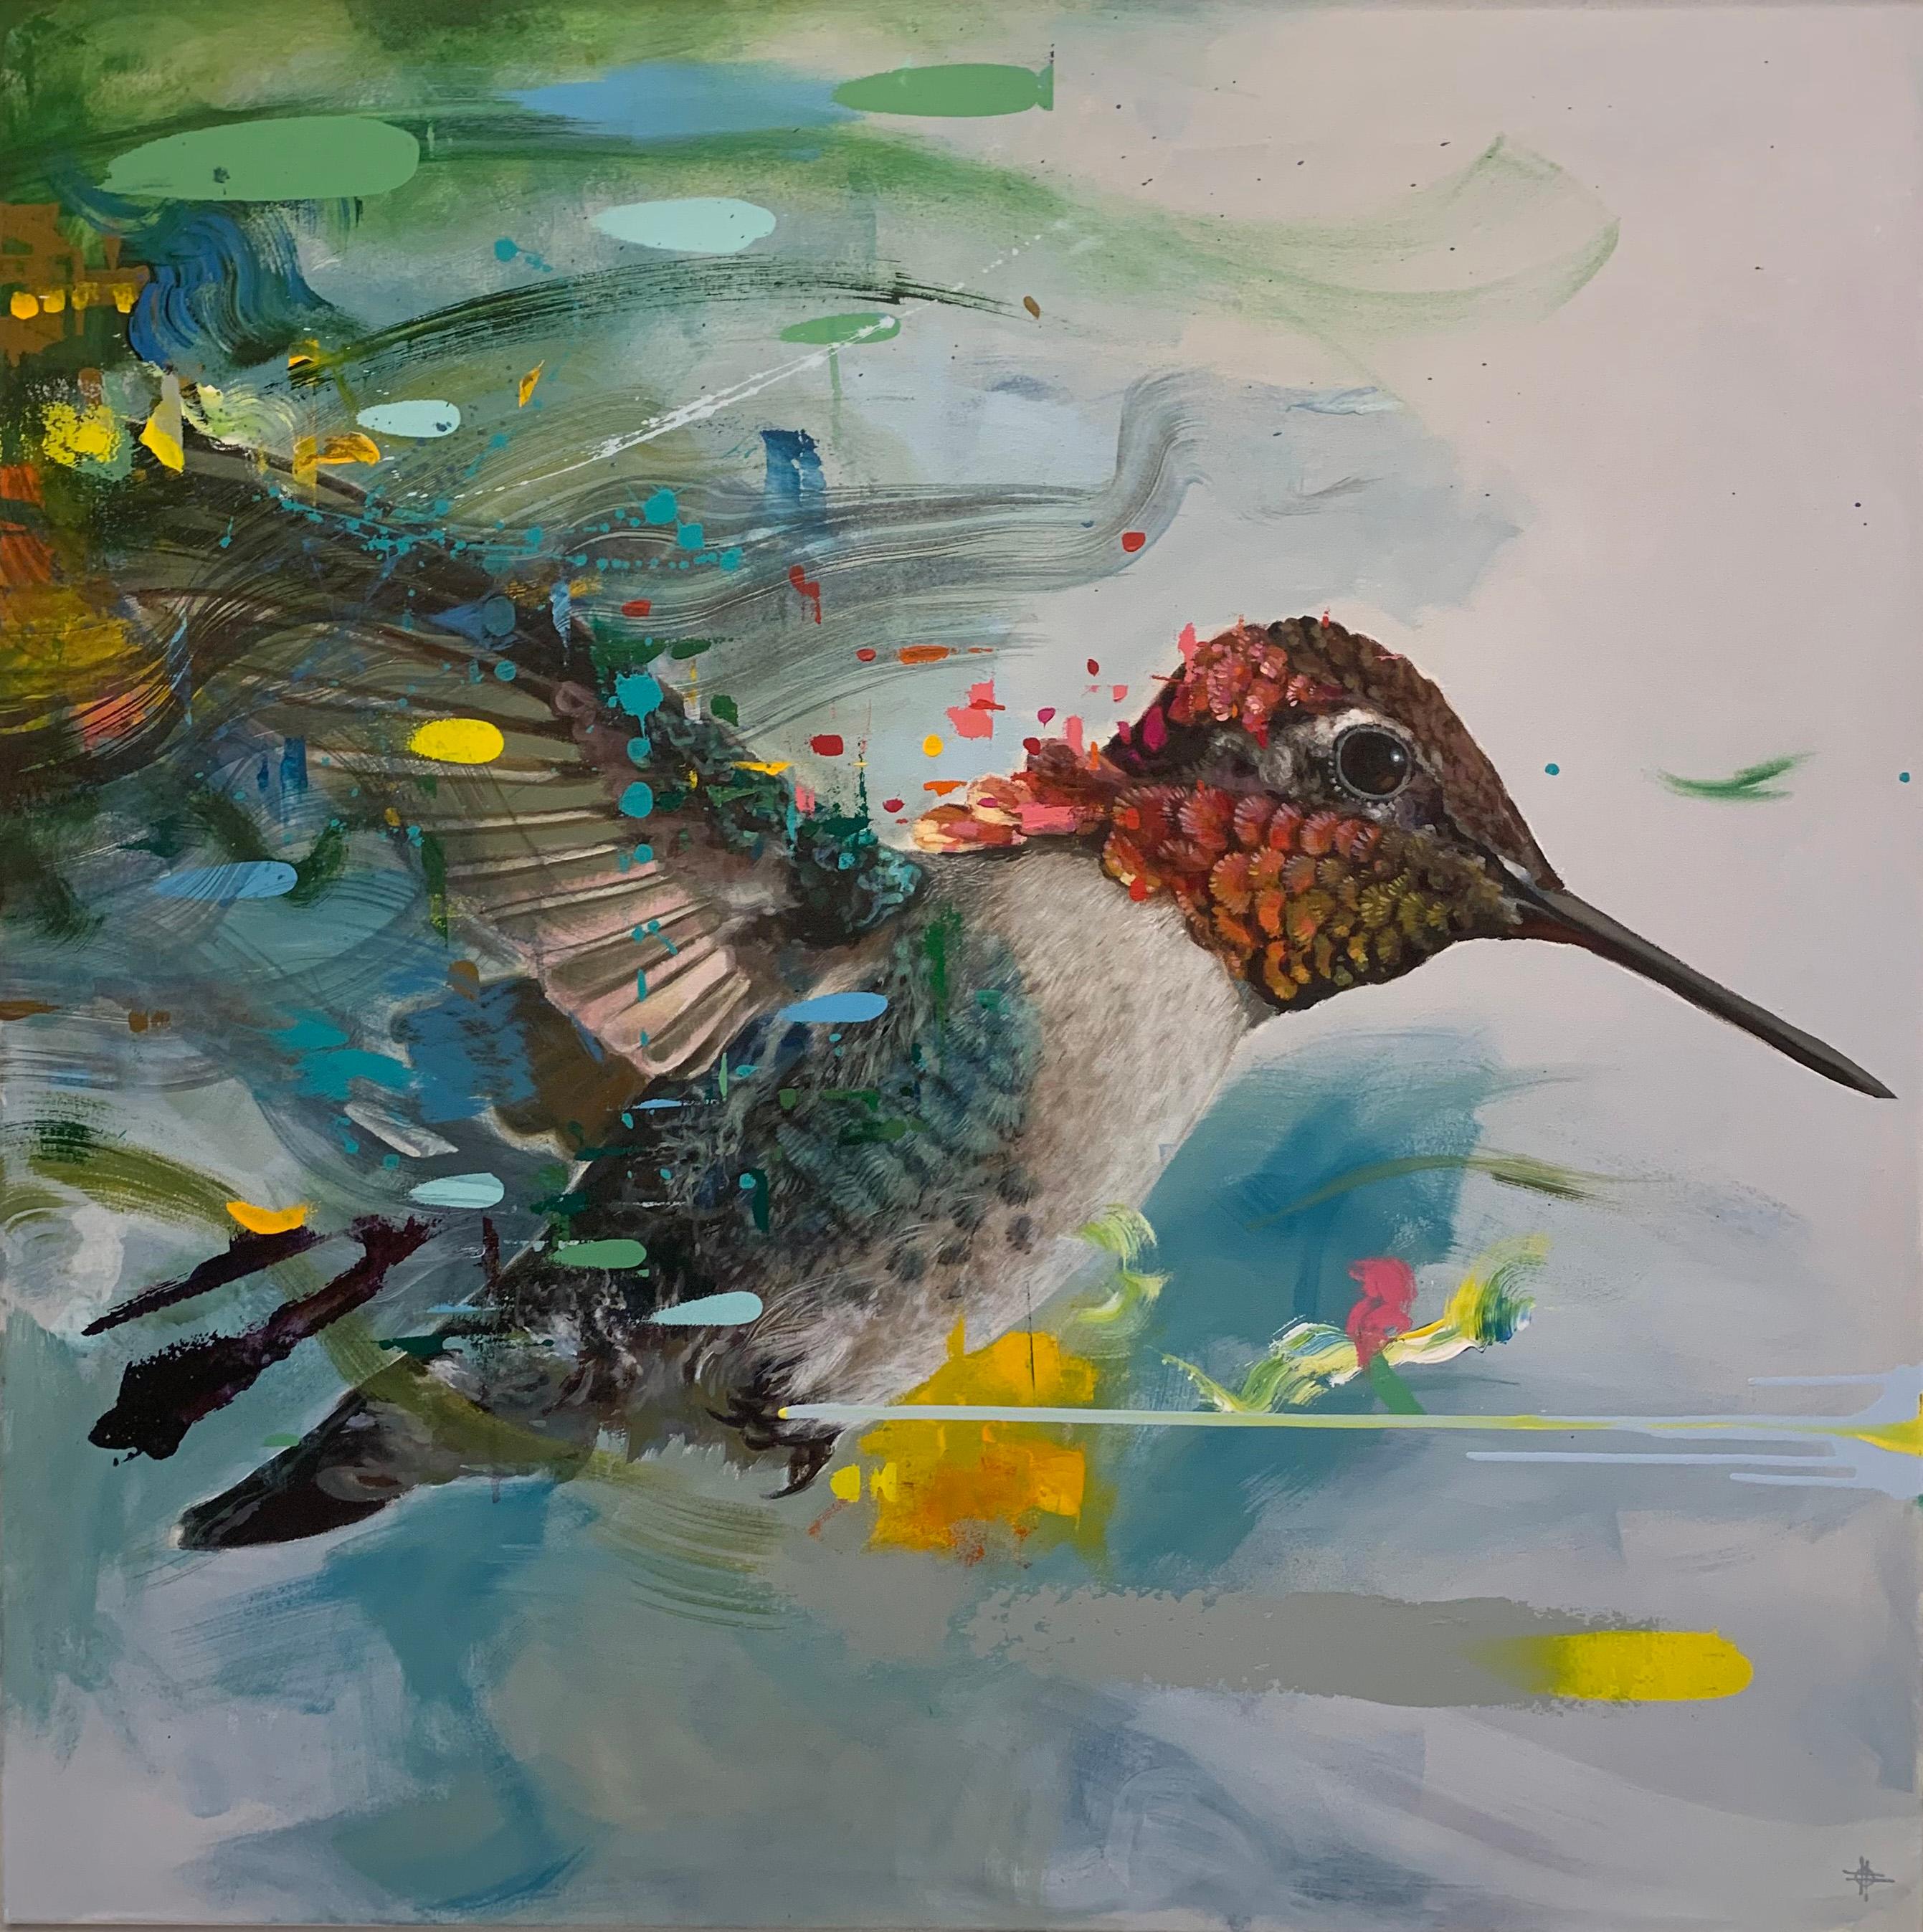 House of Iman - contemporary abstract colorful flying hummingbird painting - Painting by Keng Wai Lee & Marco Araldi